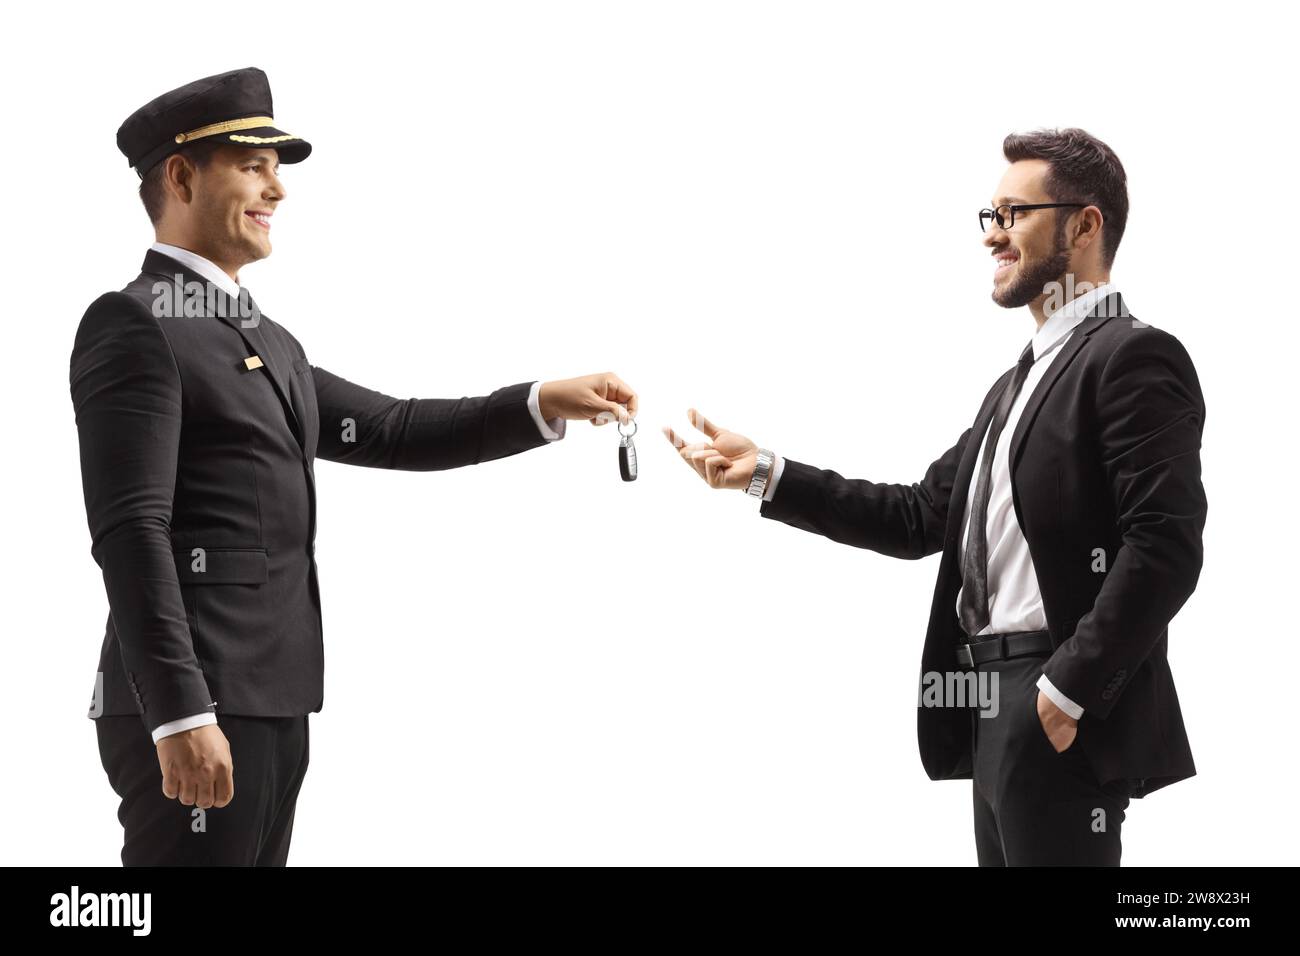 Chauffeur giving car keys to a gentleman isolated on white background Stock Photo